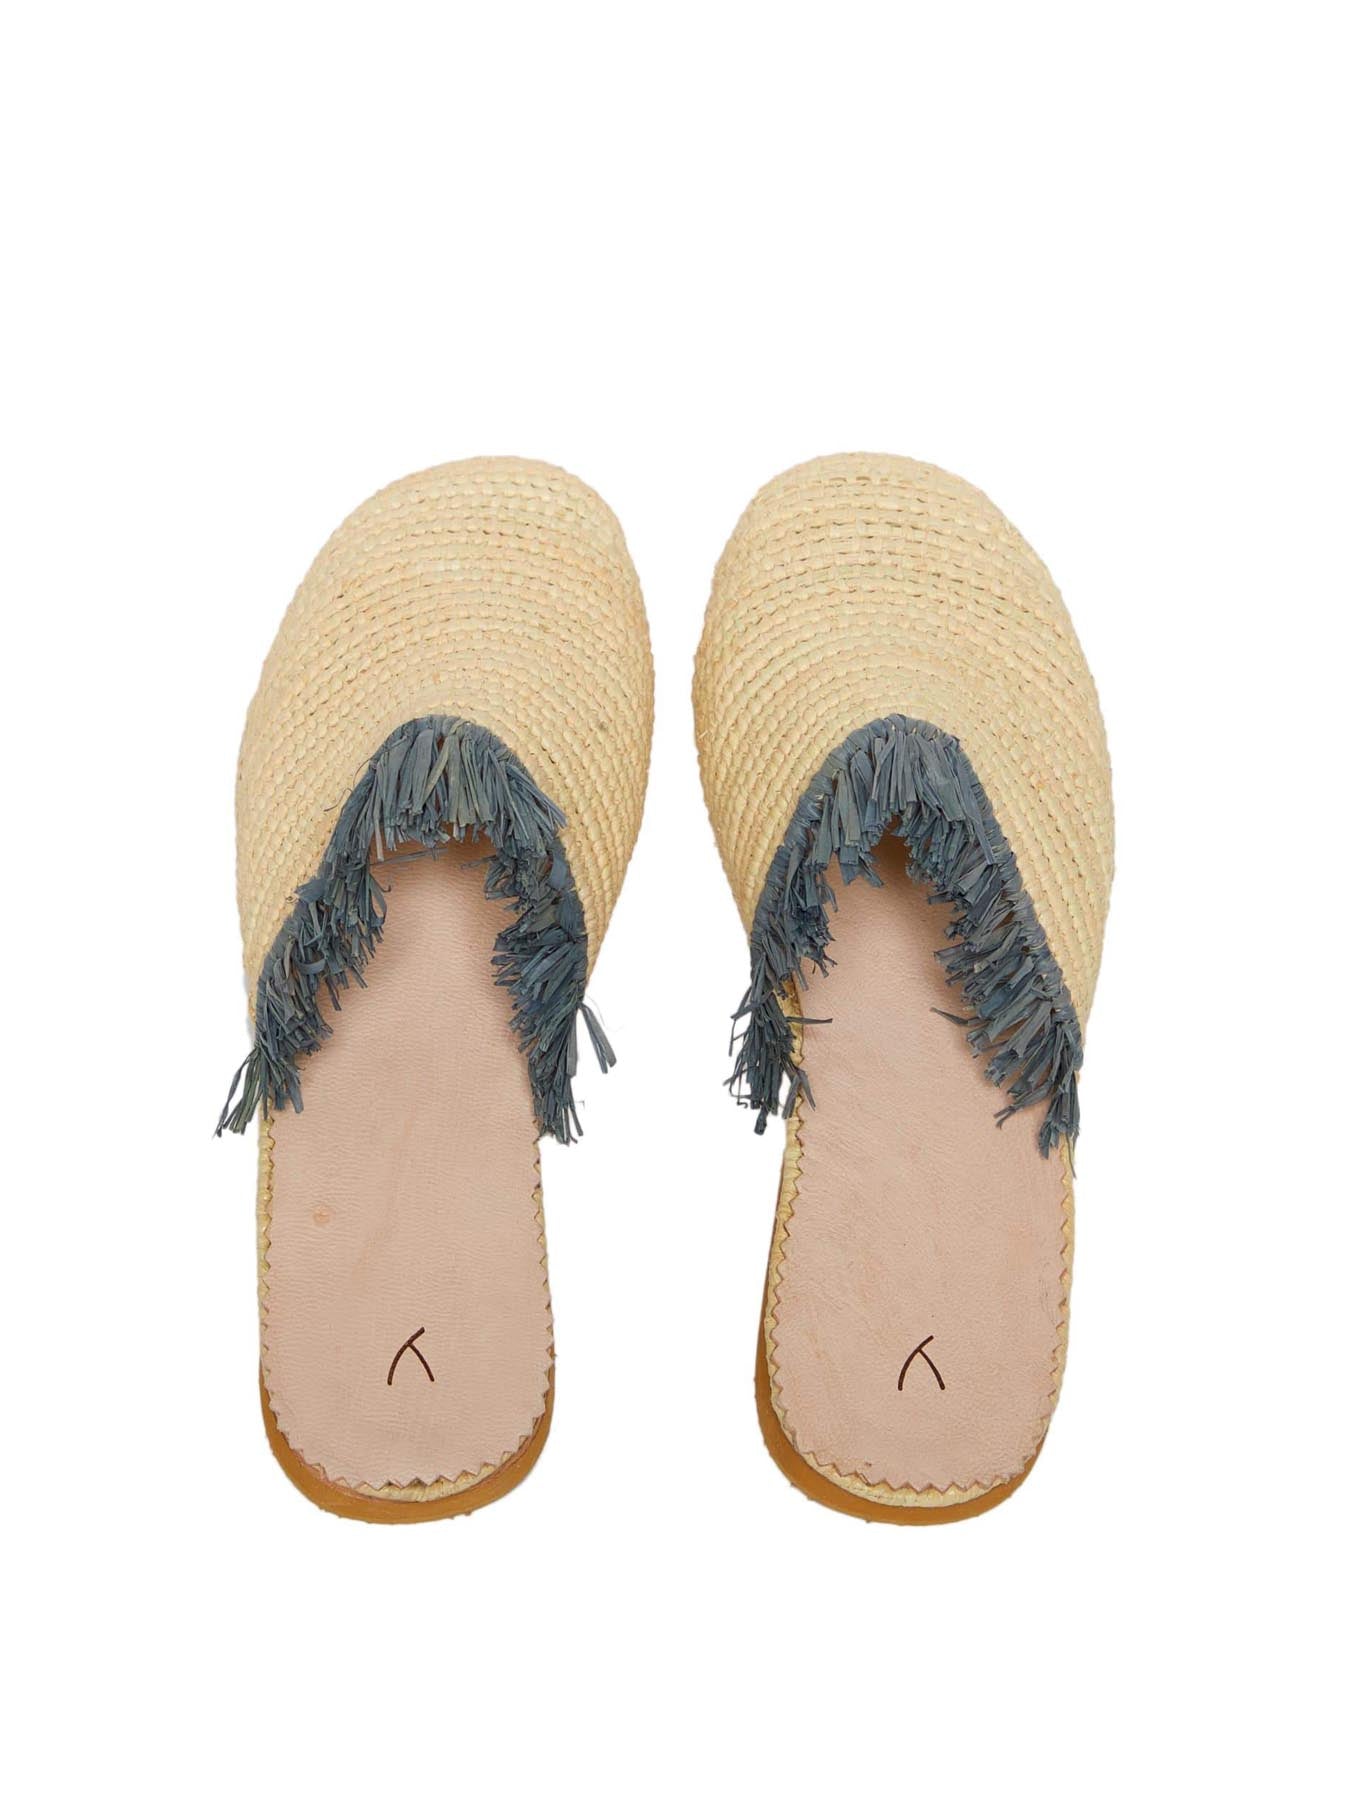 Relevé Fashion | Raffia Slippers with Fringes, and